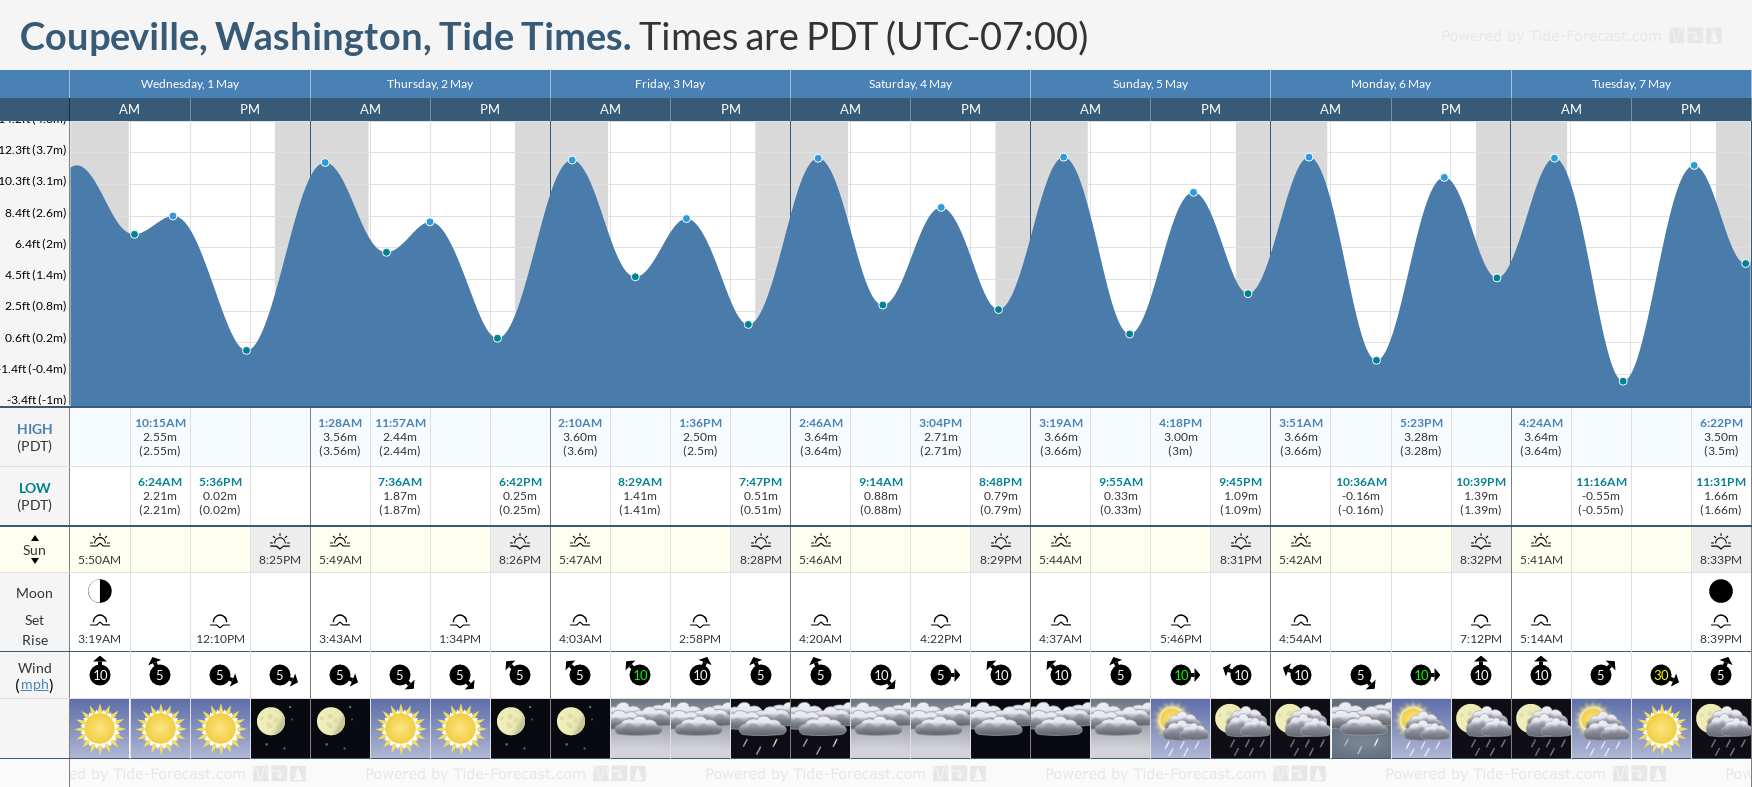 Coupeville, Washington Tide Chart including high and low tide times for the next 7 days